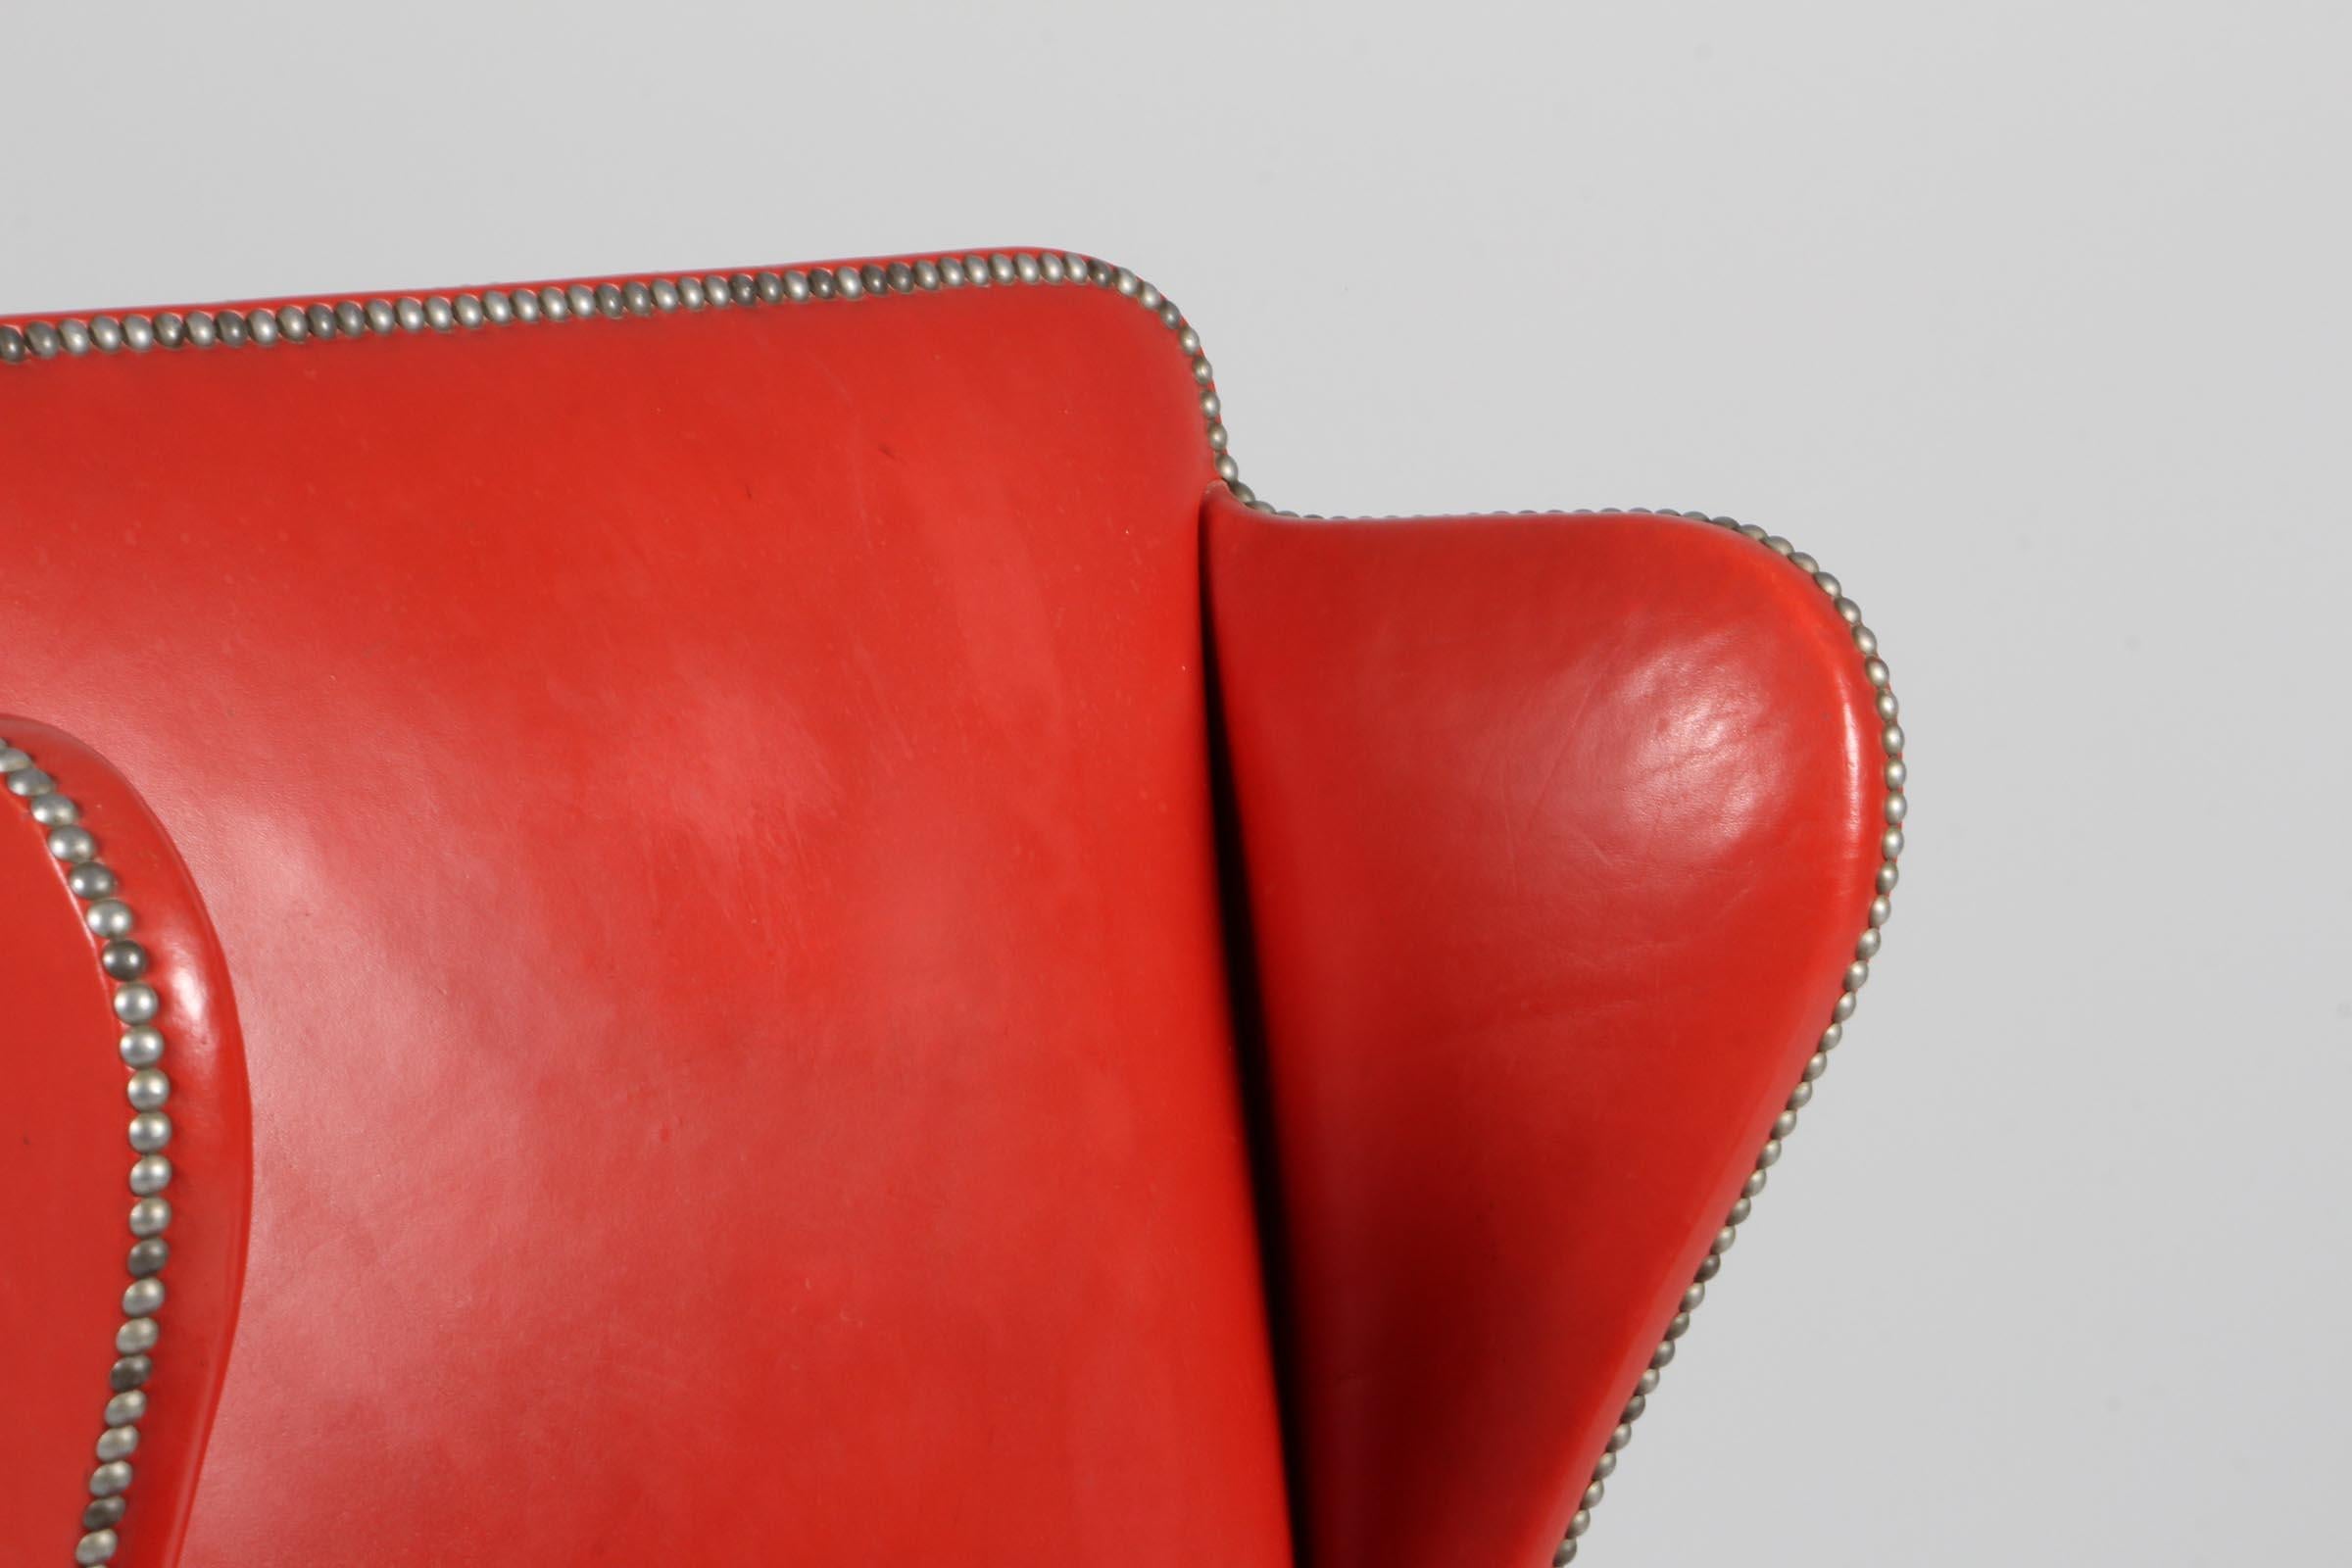 Scandinavian Modern Frits Henningsen, Wingback Chair with Original Patinated Red Leather, 1940s